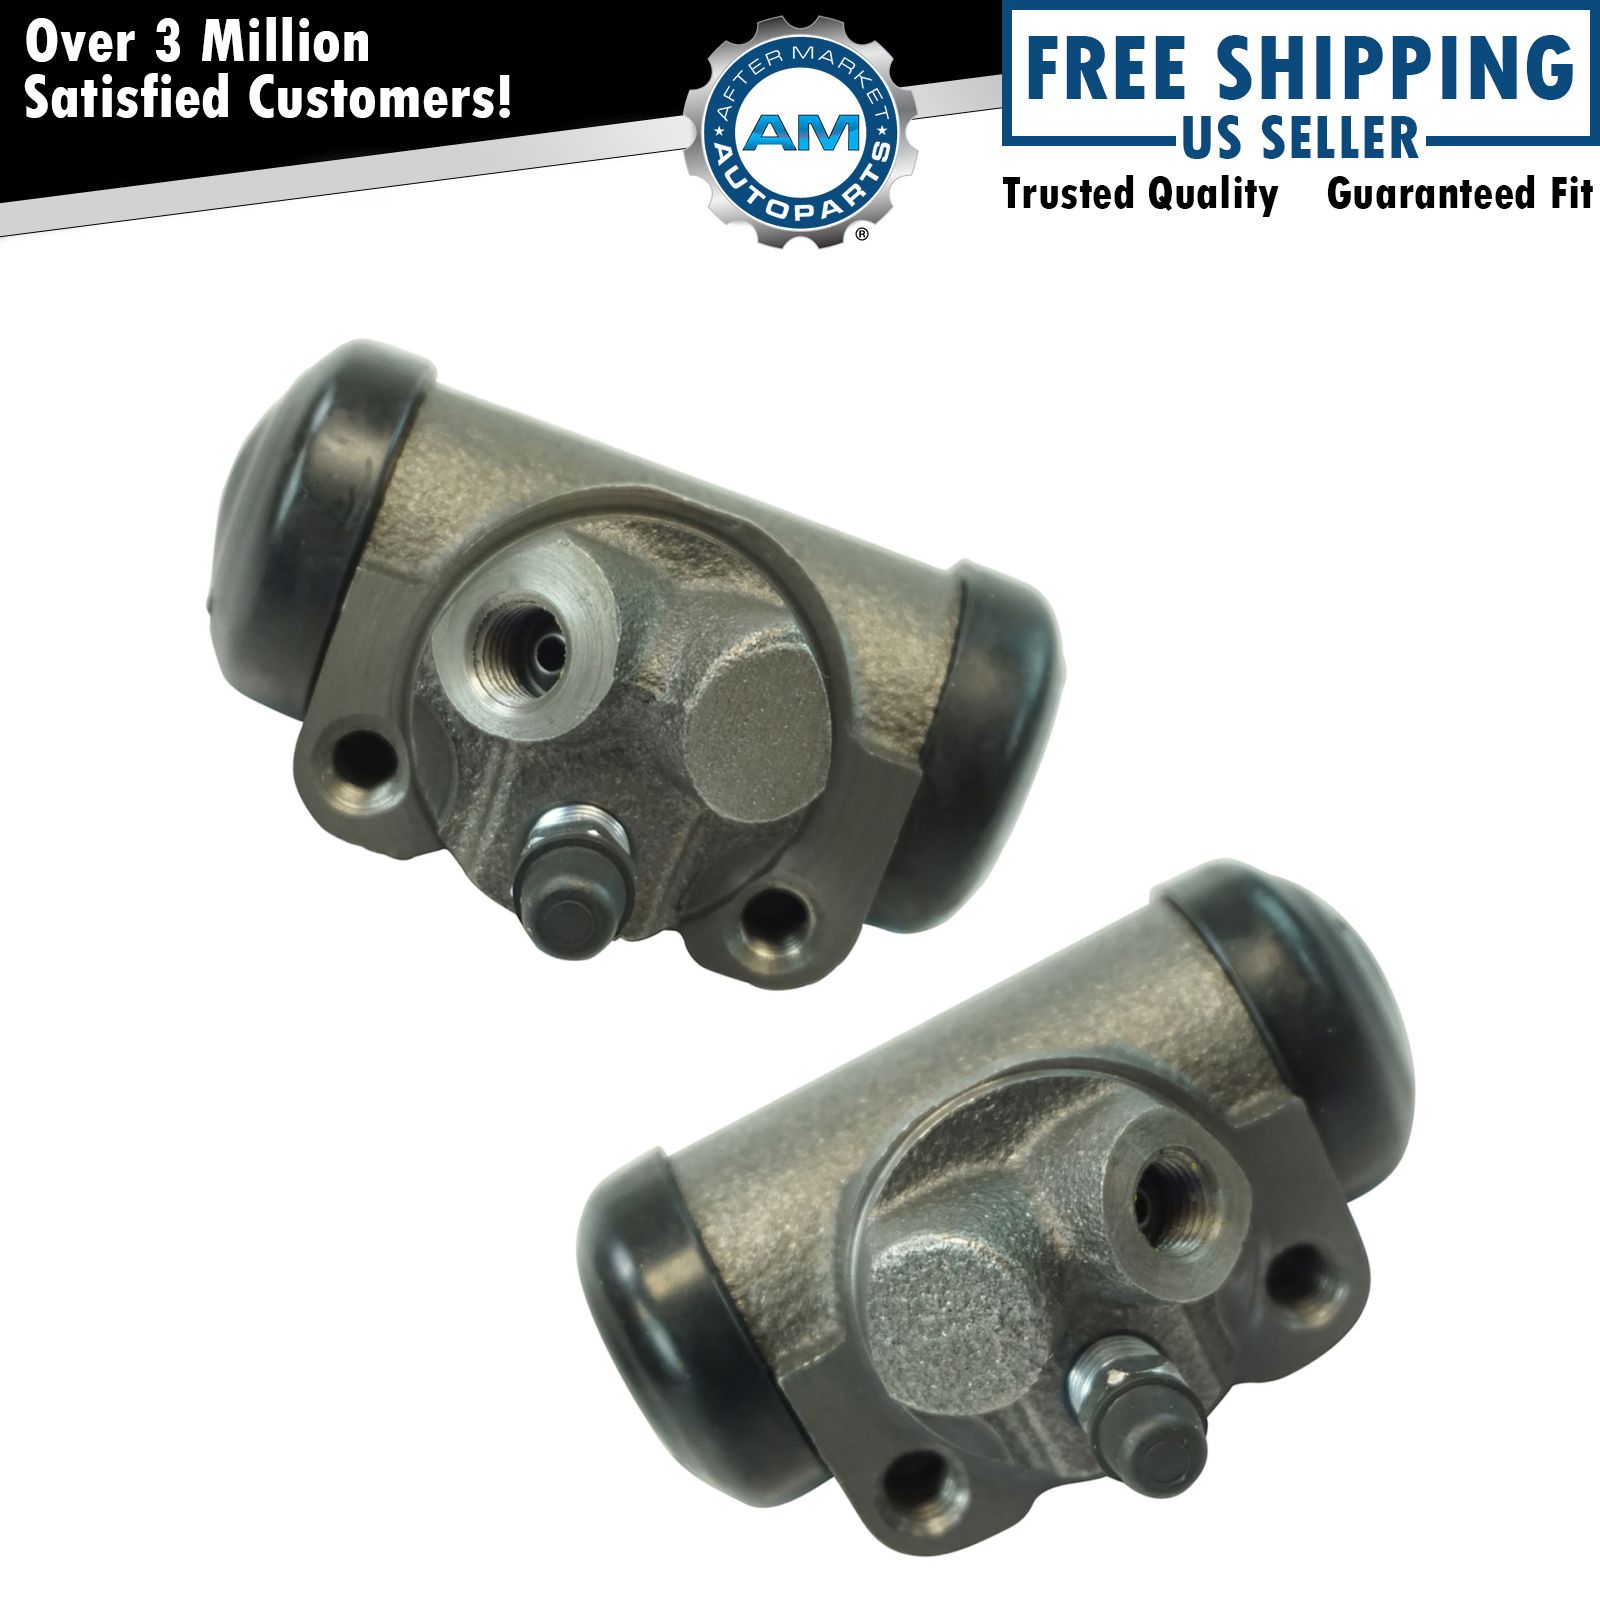 Dorman Rear Wheel Cylinder LH RH Set of 2 Pair for Buick Chevy GMC Jeep New